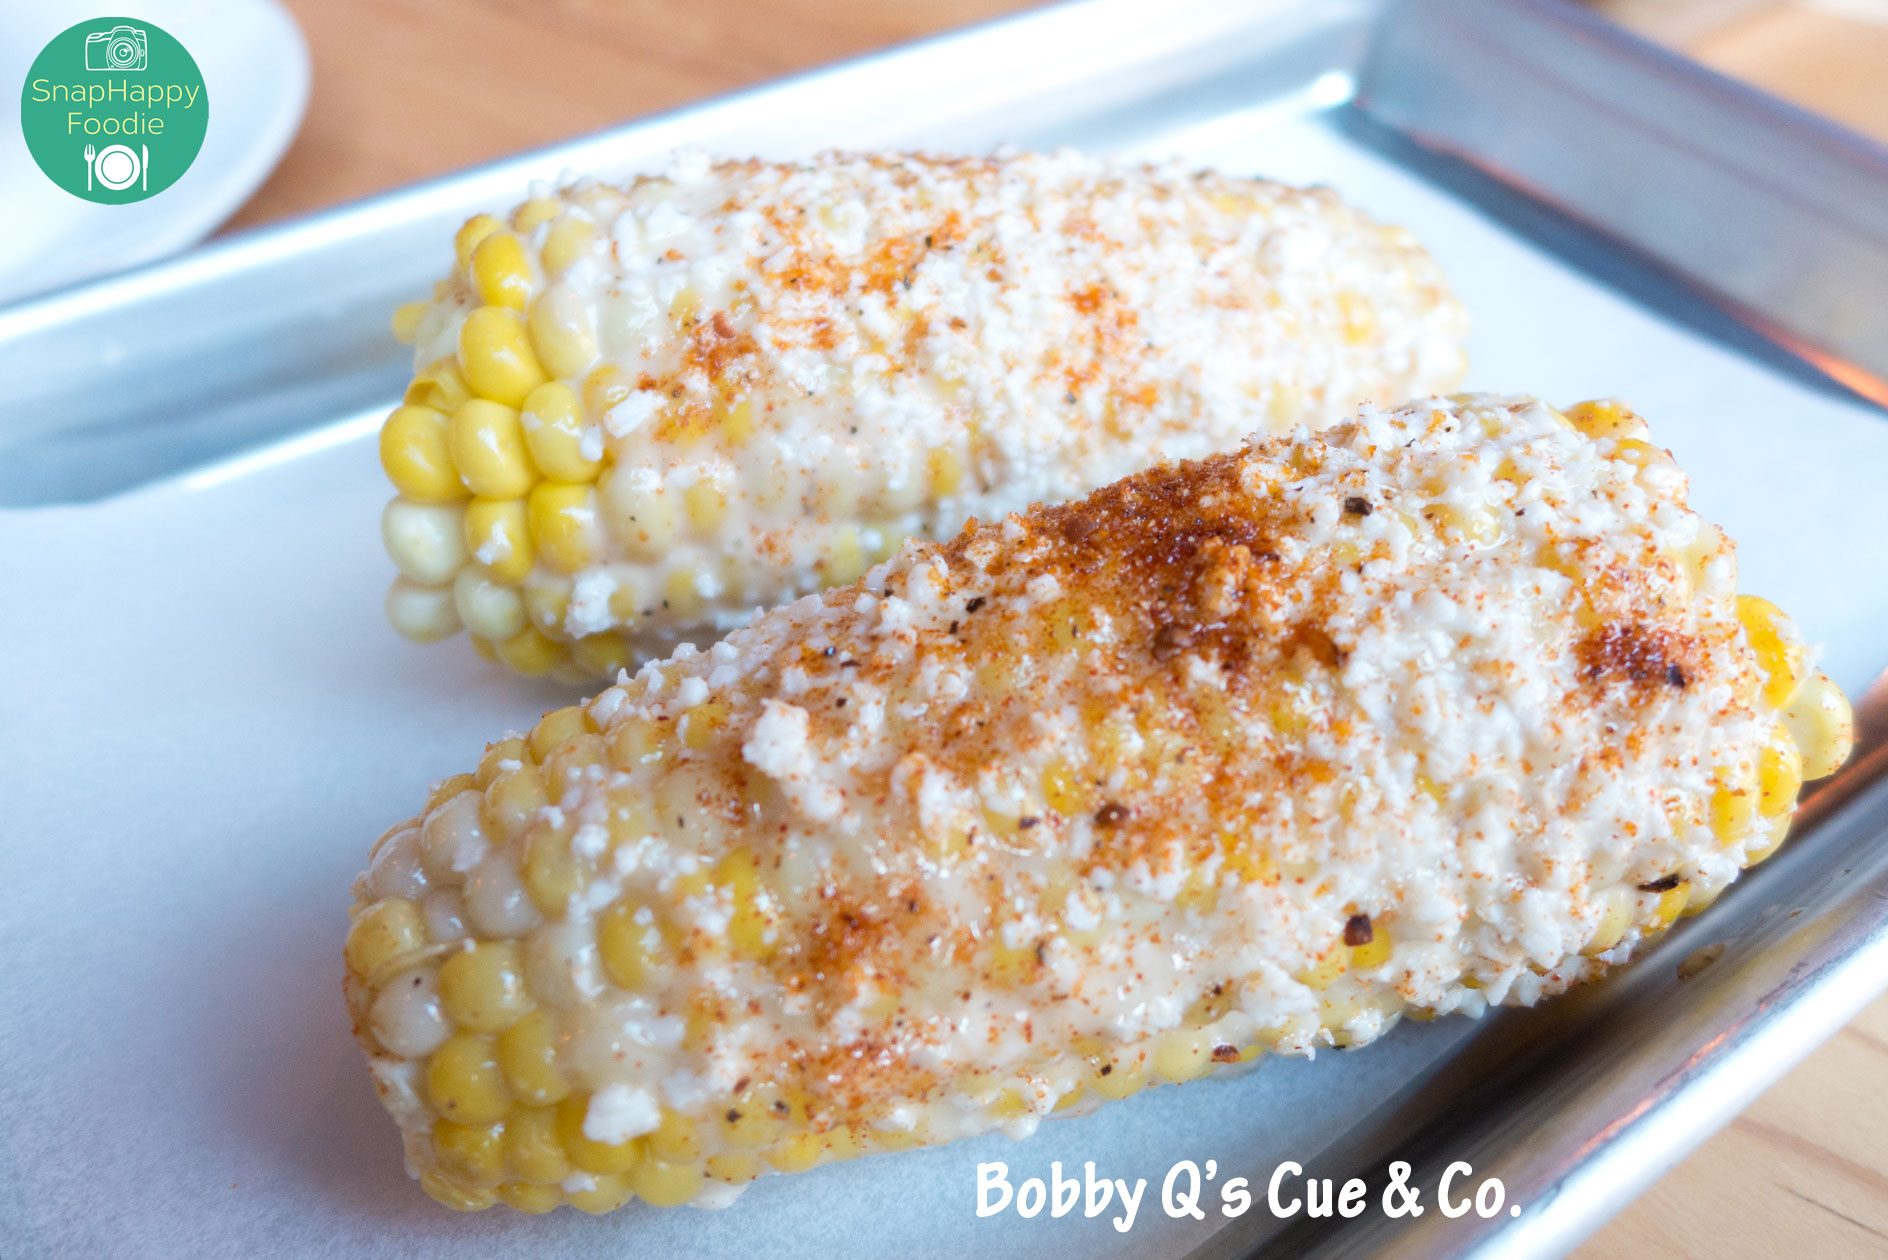 Grilled BBQ Street Corn from Bobby Q’s Cue & Co. South Norwalk, CT